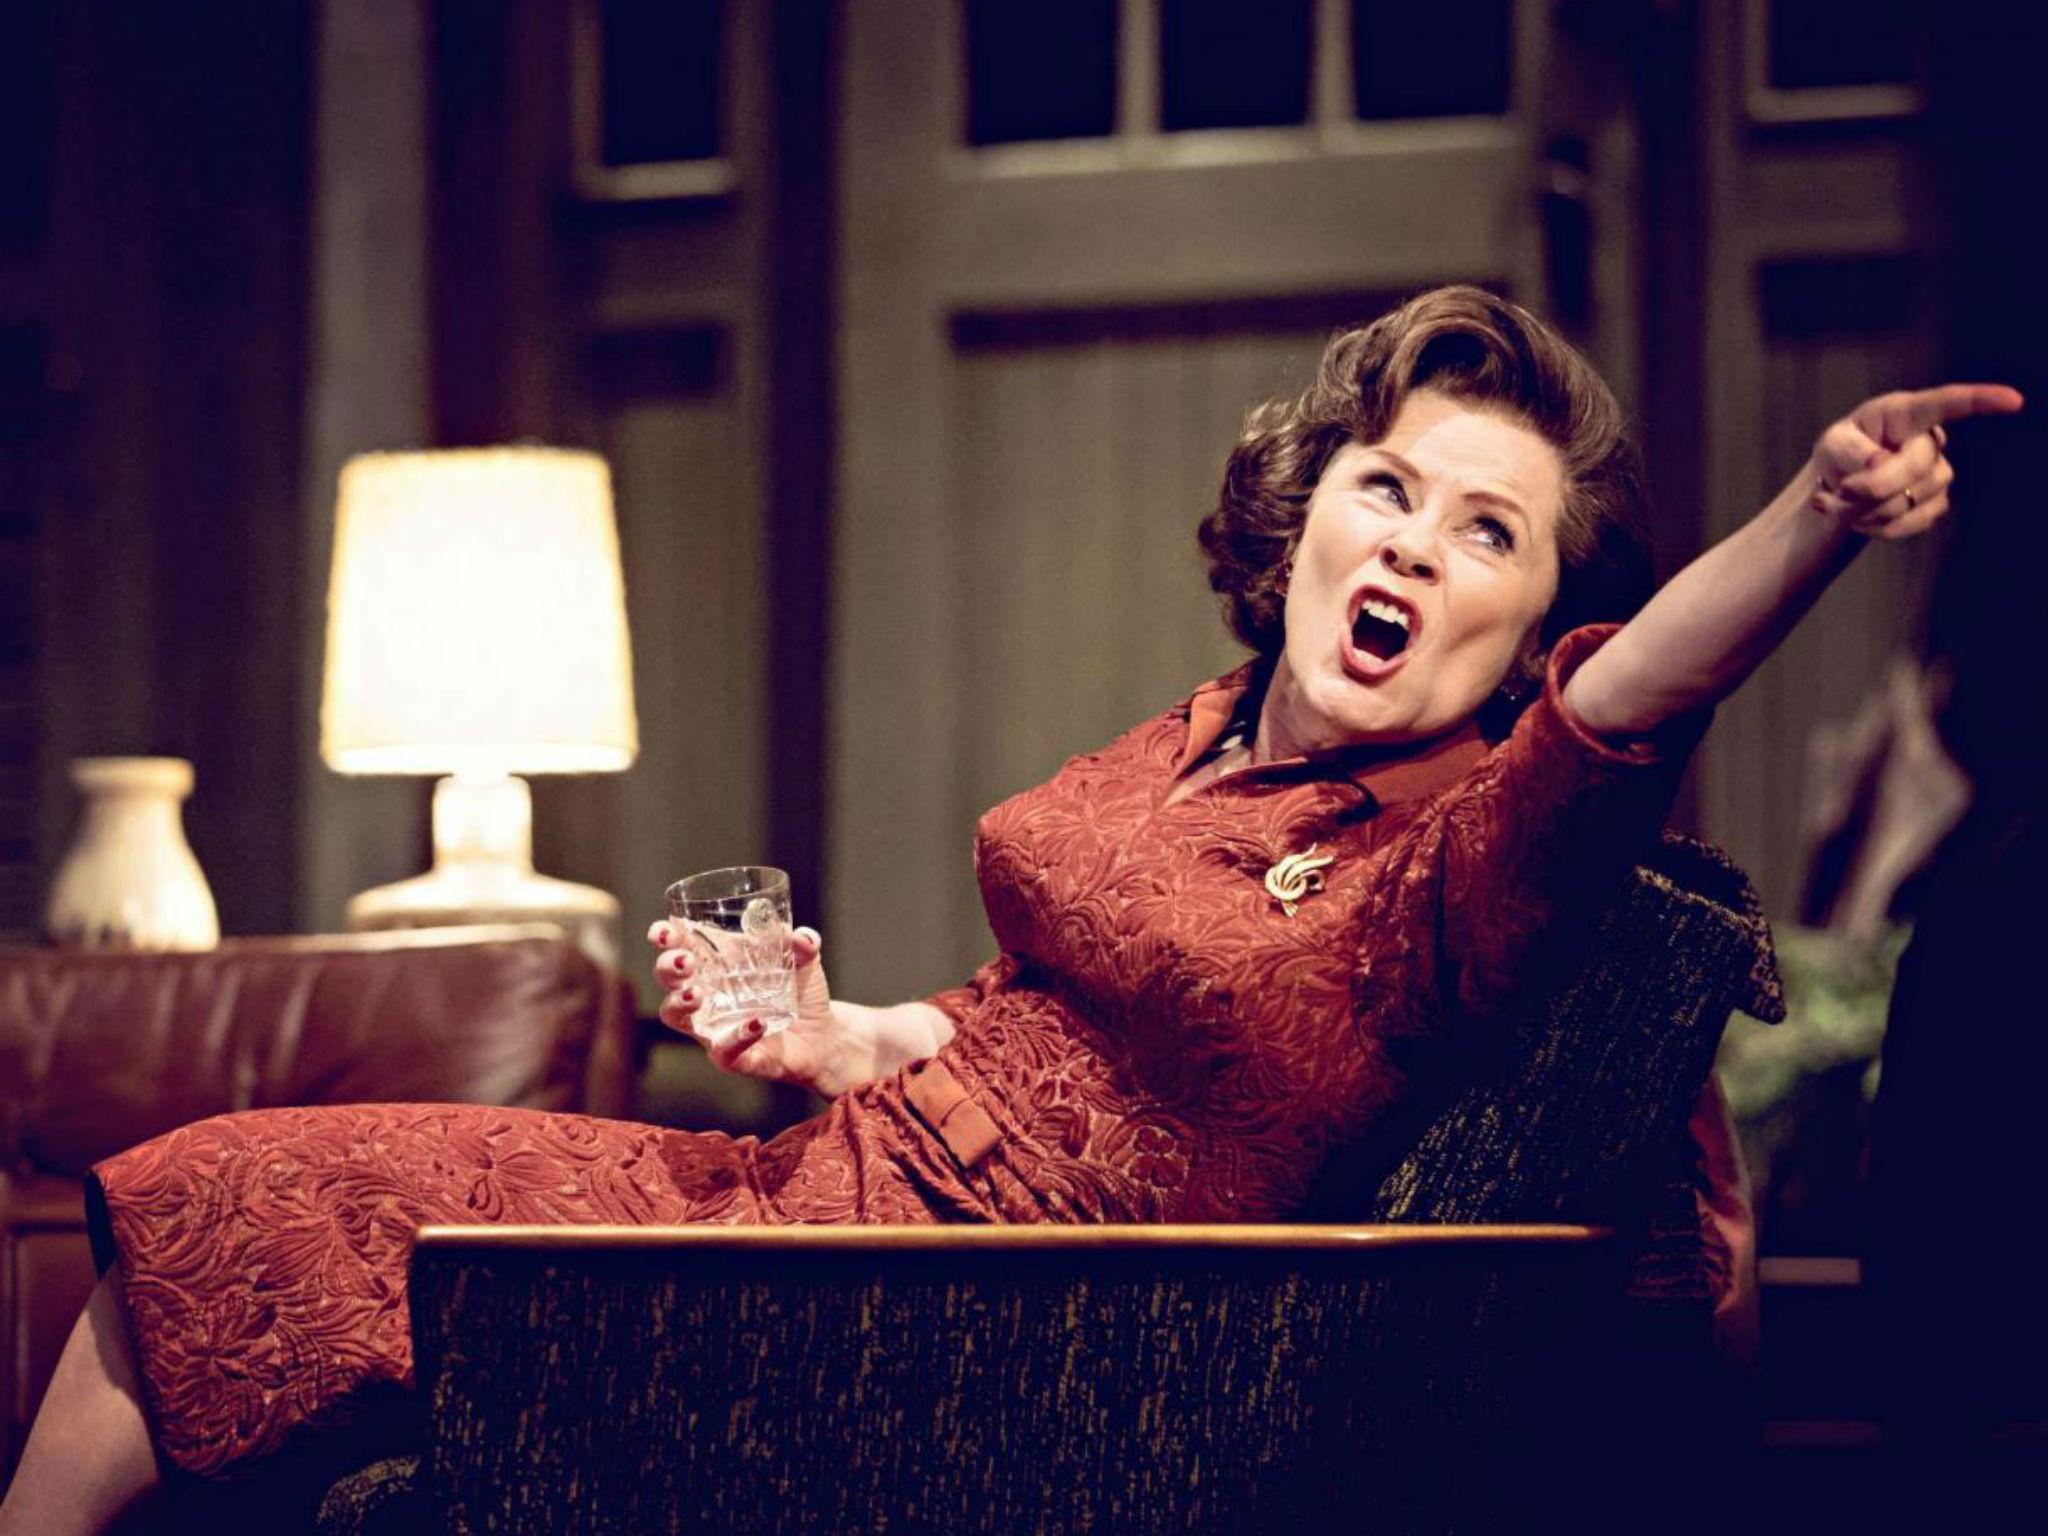 Imelda Staunton recently starred as Martha in ‘Who’s Afraid of Virginia Woolf?’ at the Harold Pinter Theatre in London